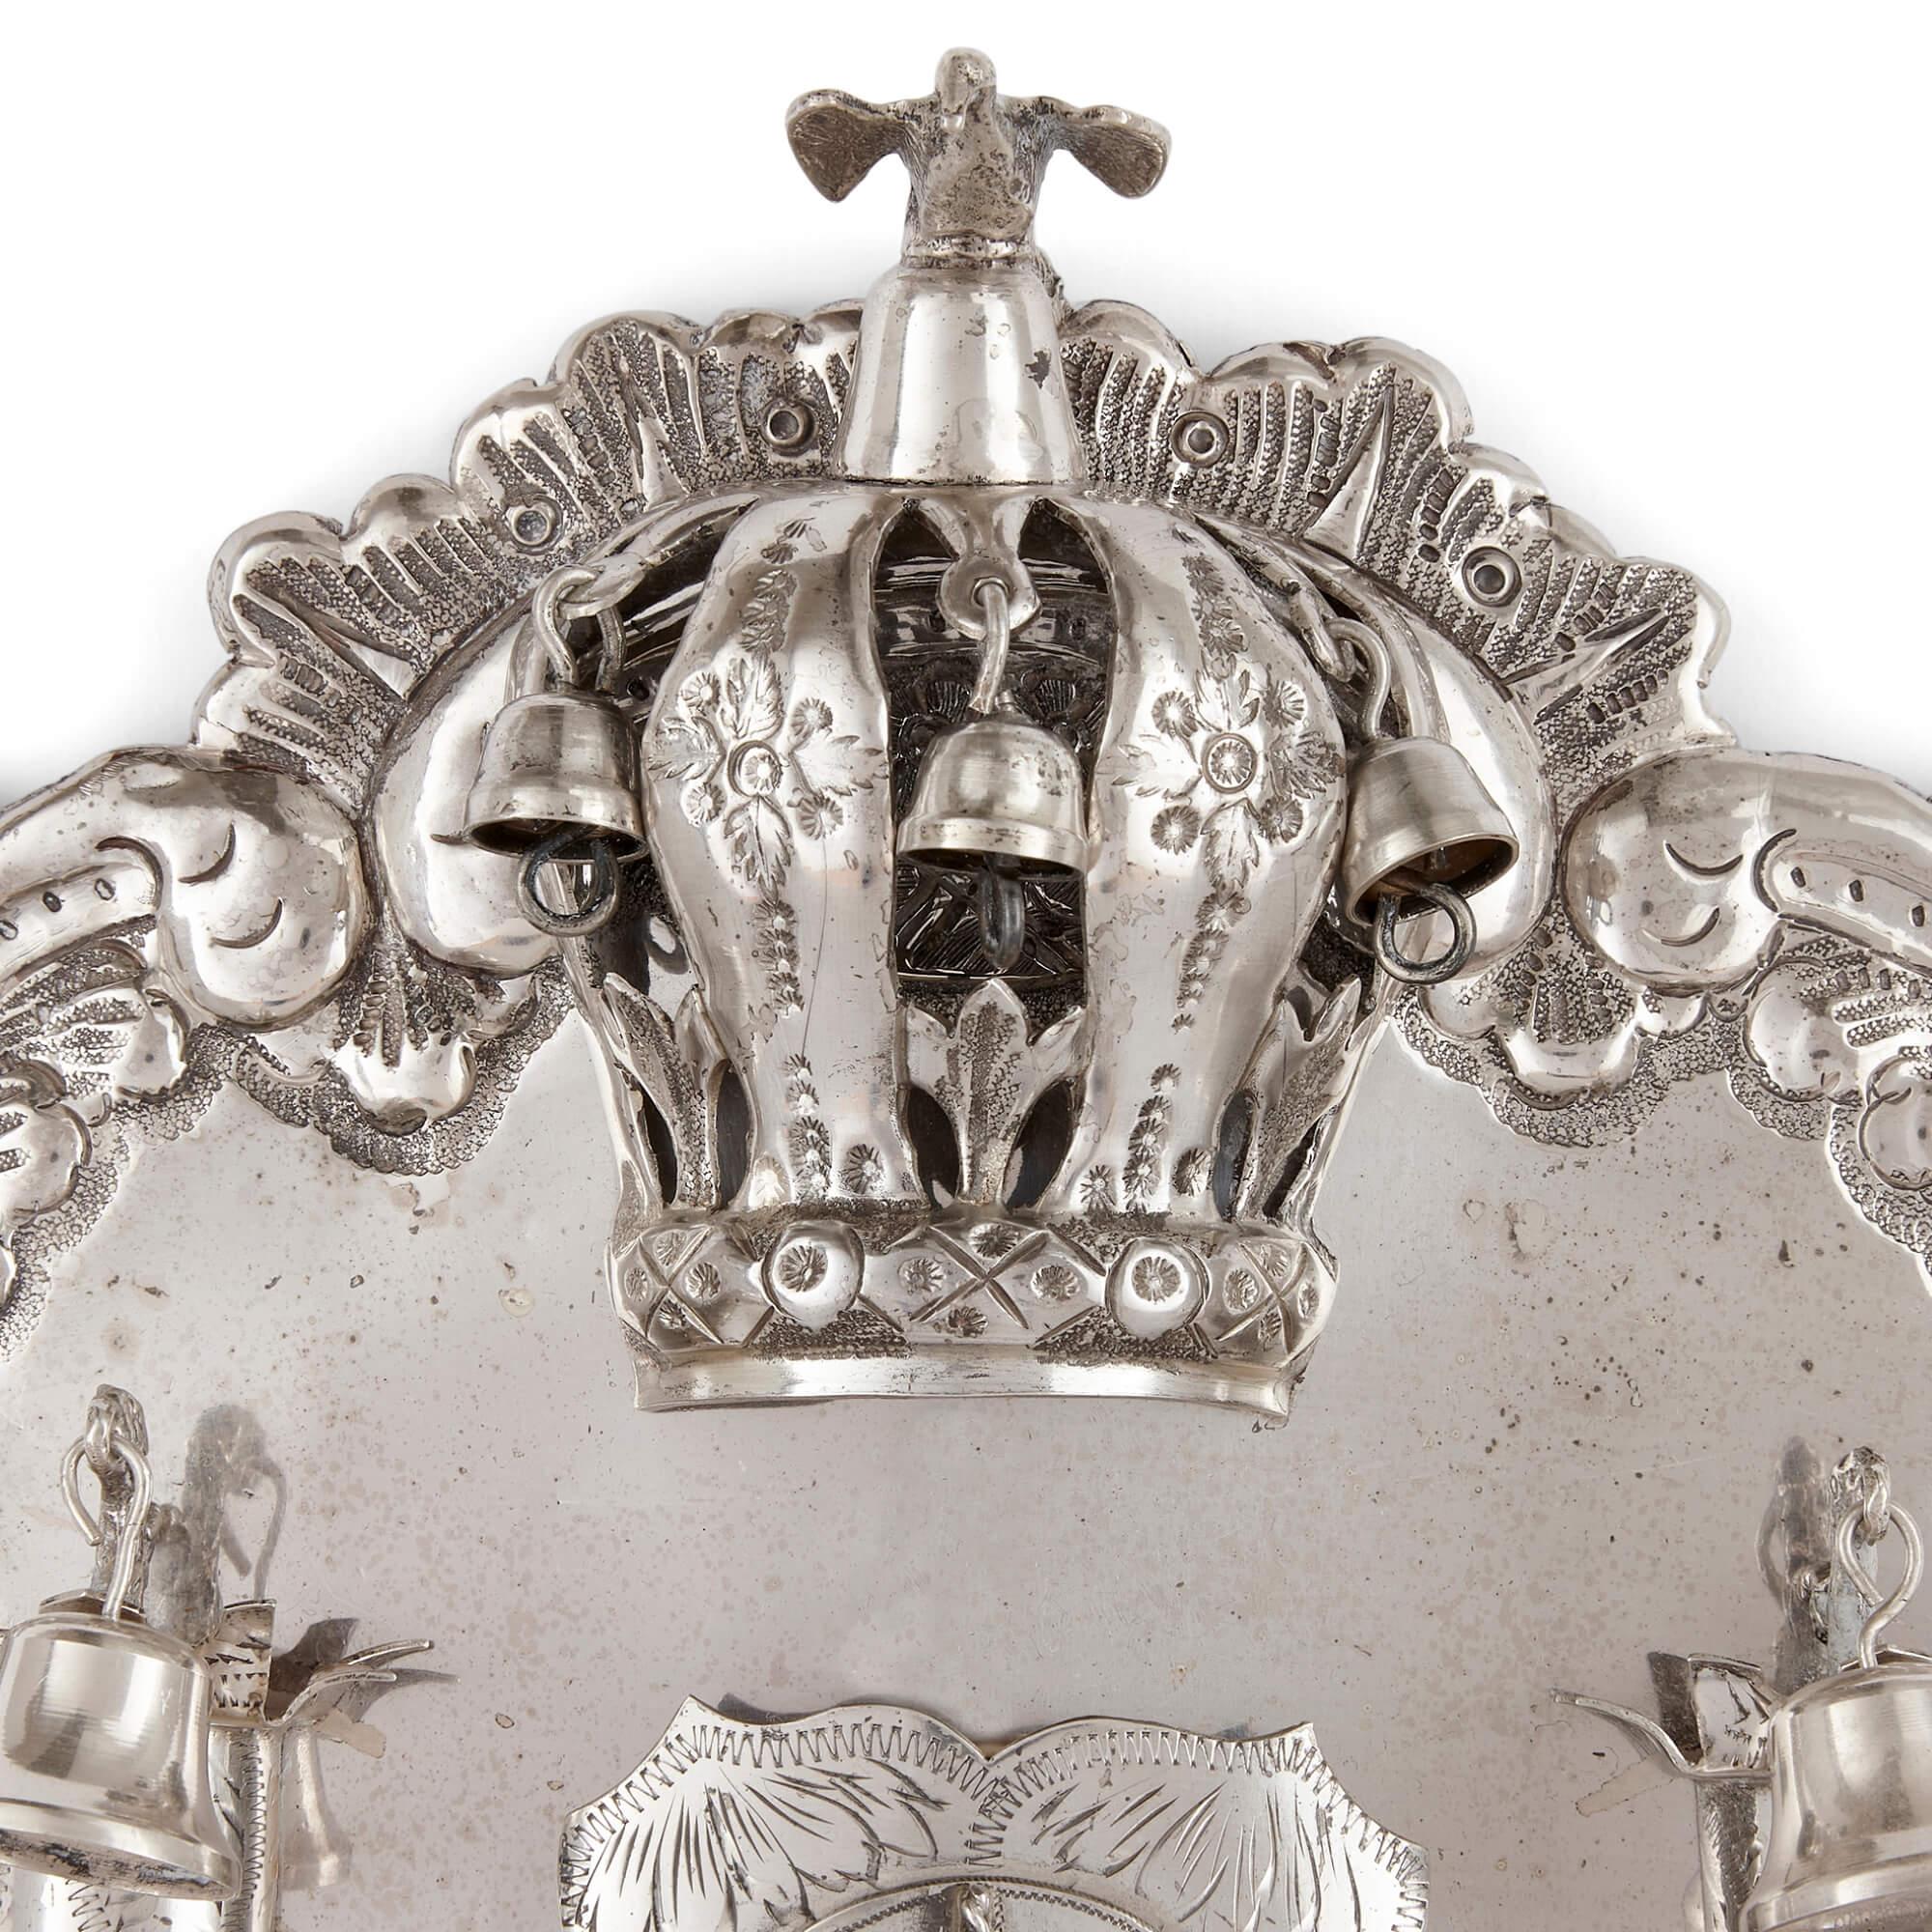 Sterling silver antique Judaica Torah breast plate, Late 19th century
Continental, 1882
Height 34cm, width 26cm, depth 5cm

This wonderful piece of antique Judaica is a large, exceptionally fine sterling silver Torah breast plate, or shield,